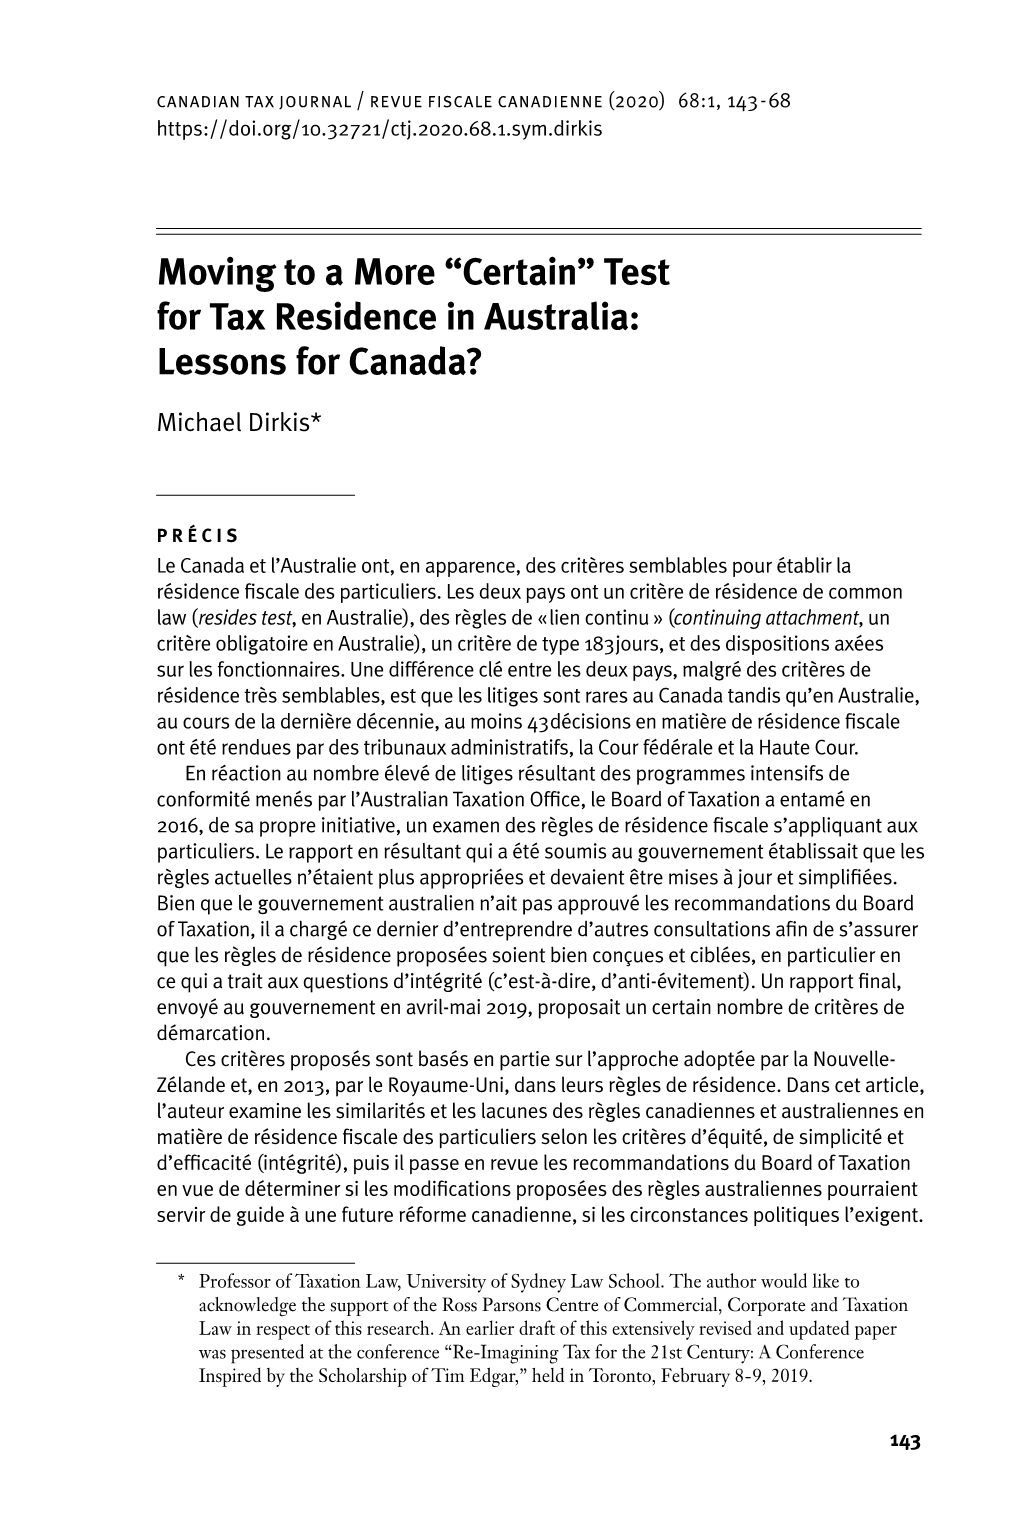 Moving to a More “Certain” Test for Tax Residence in Australia: Lessons for Canada?